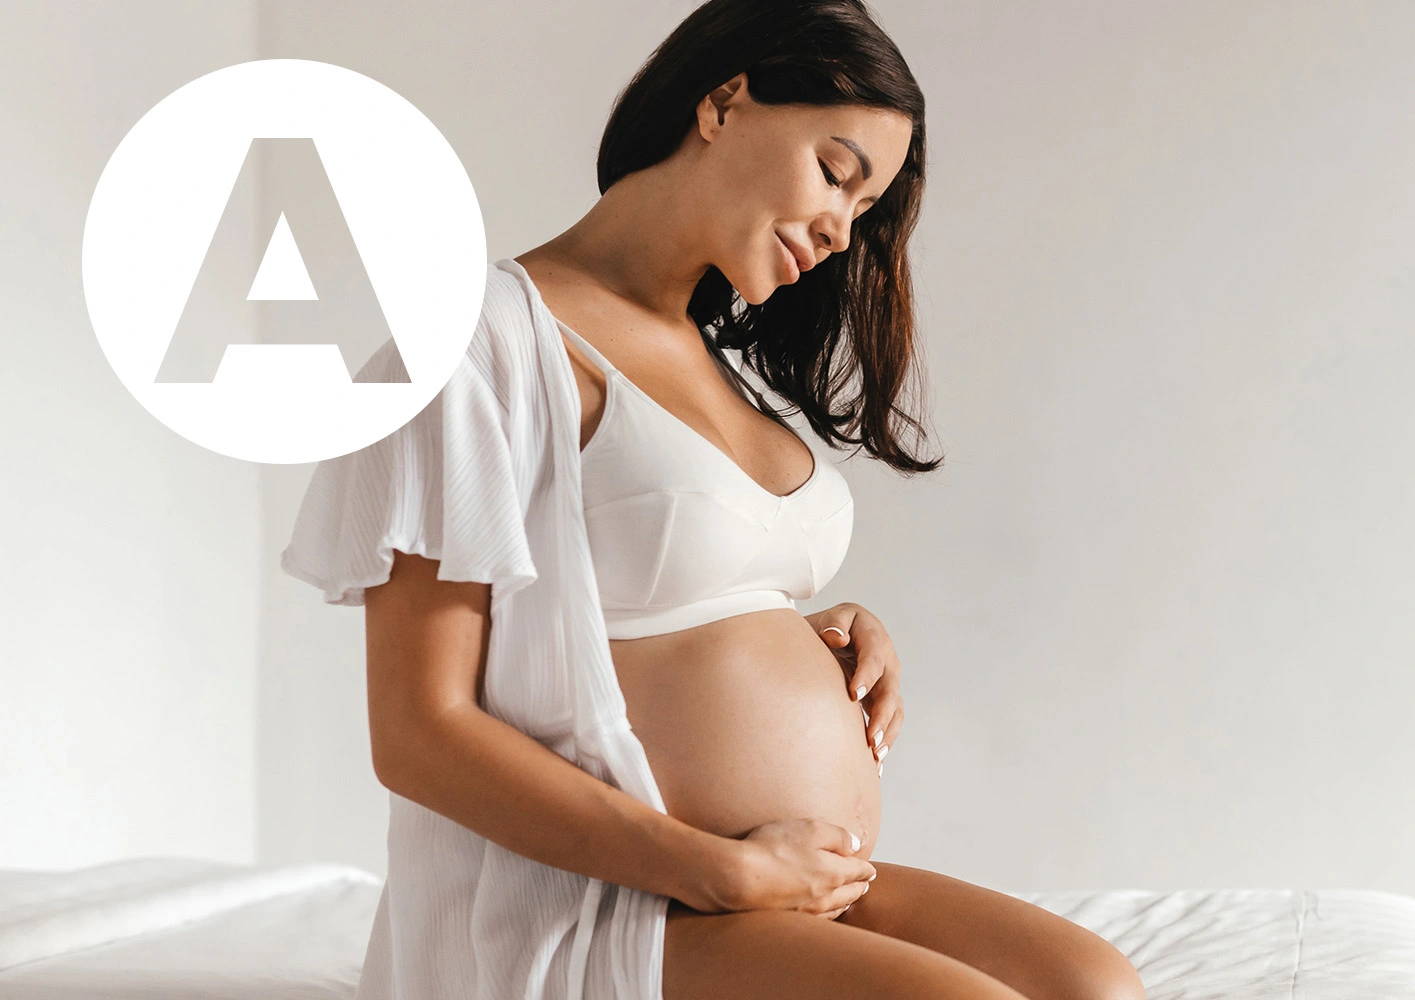 Letter A / Pregnant woman holding bump.